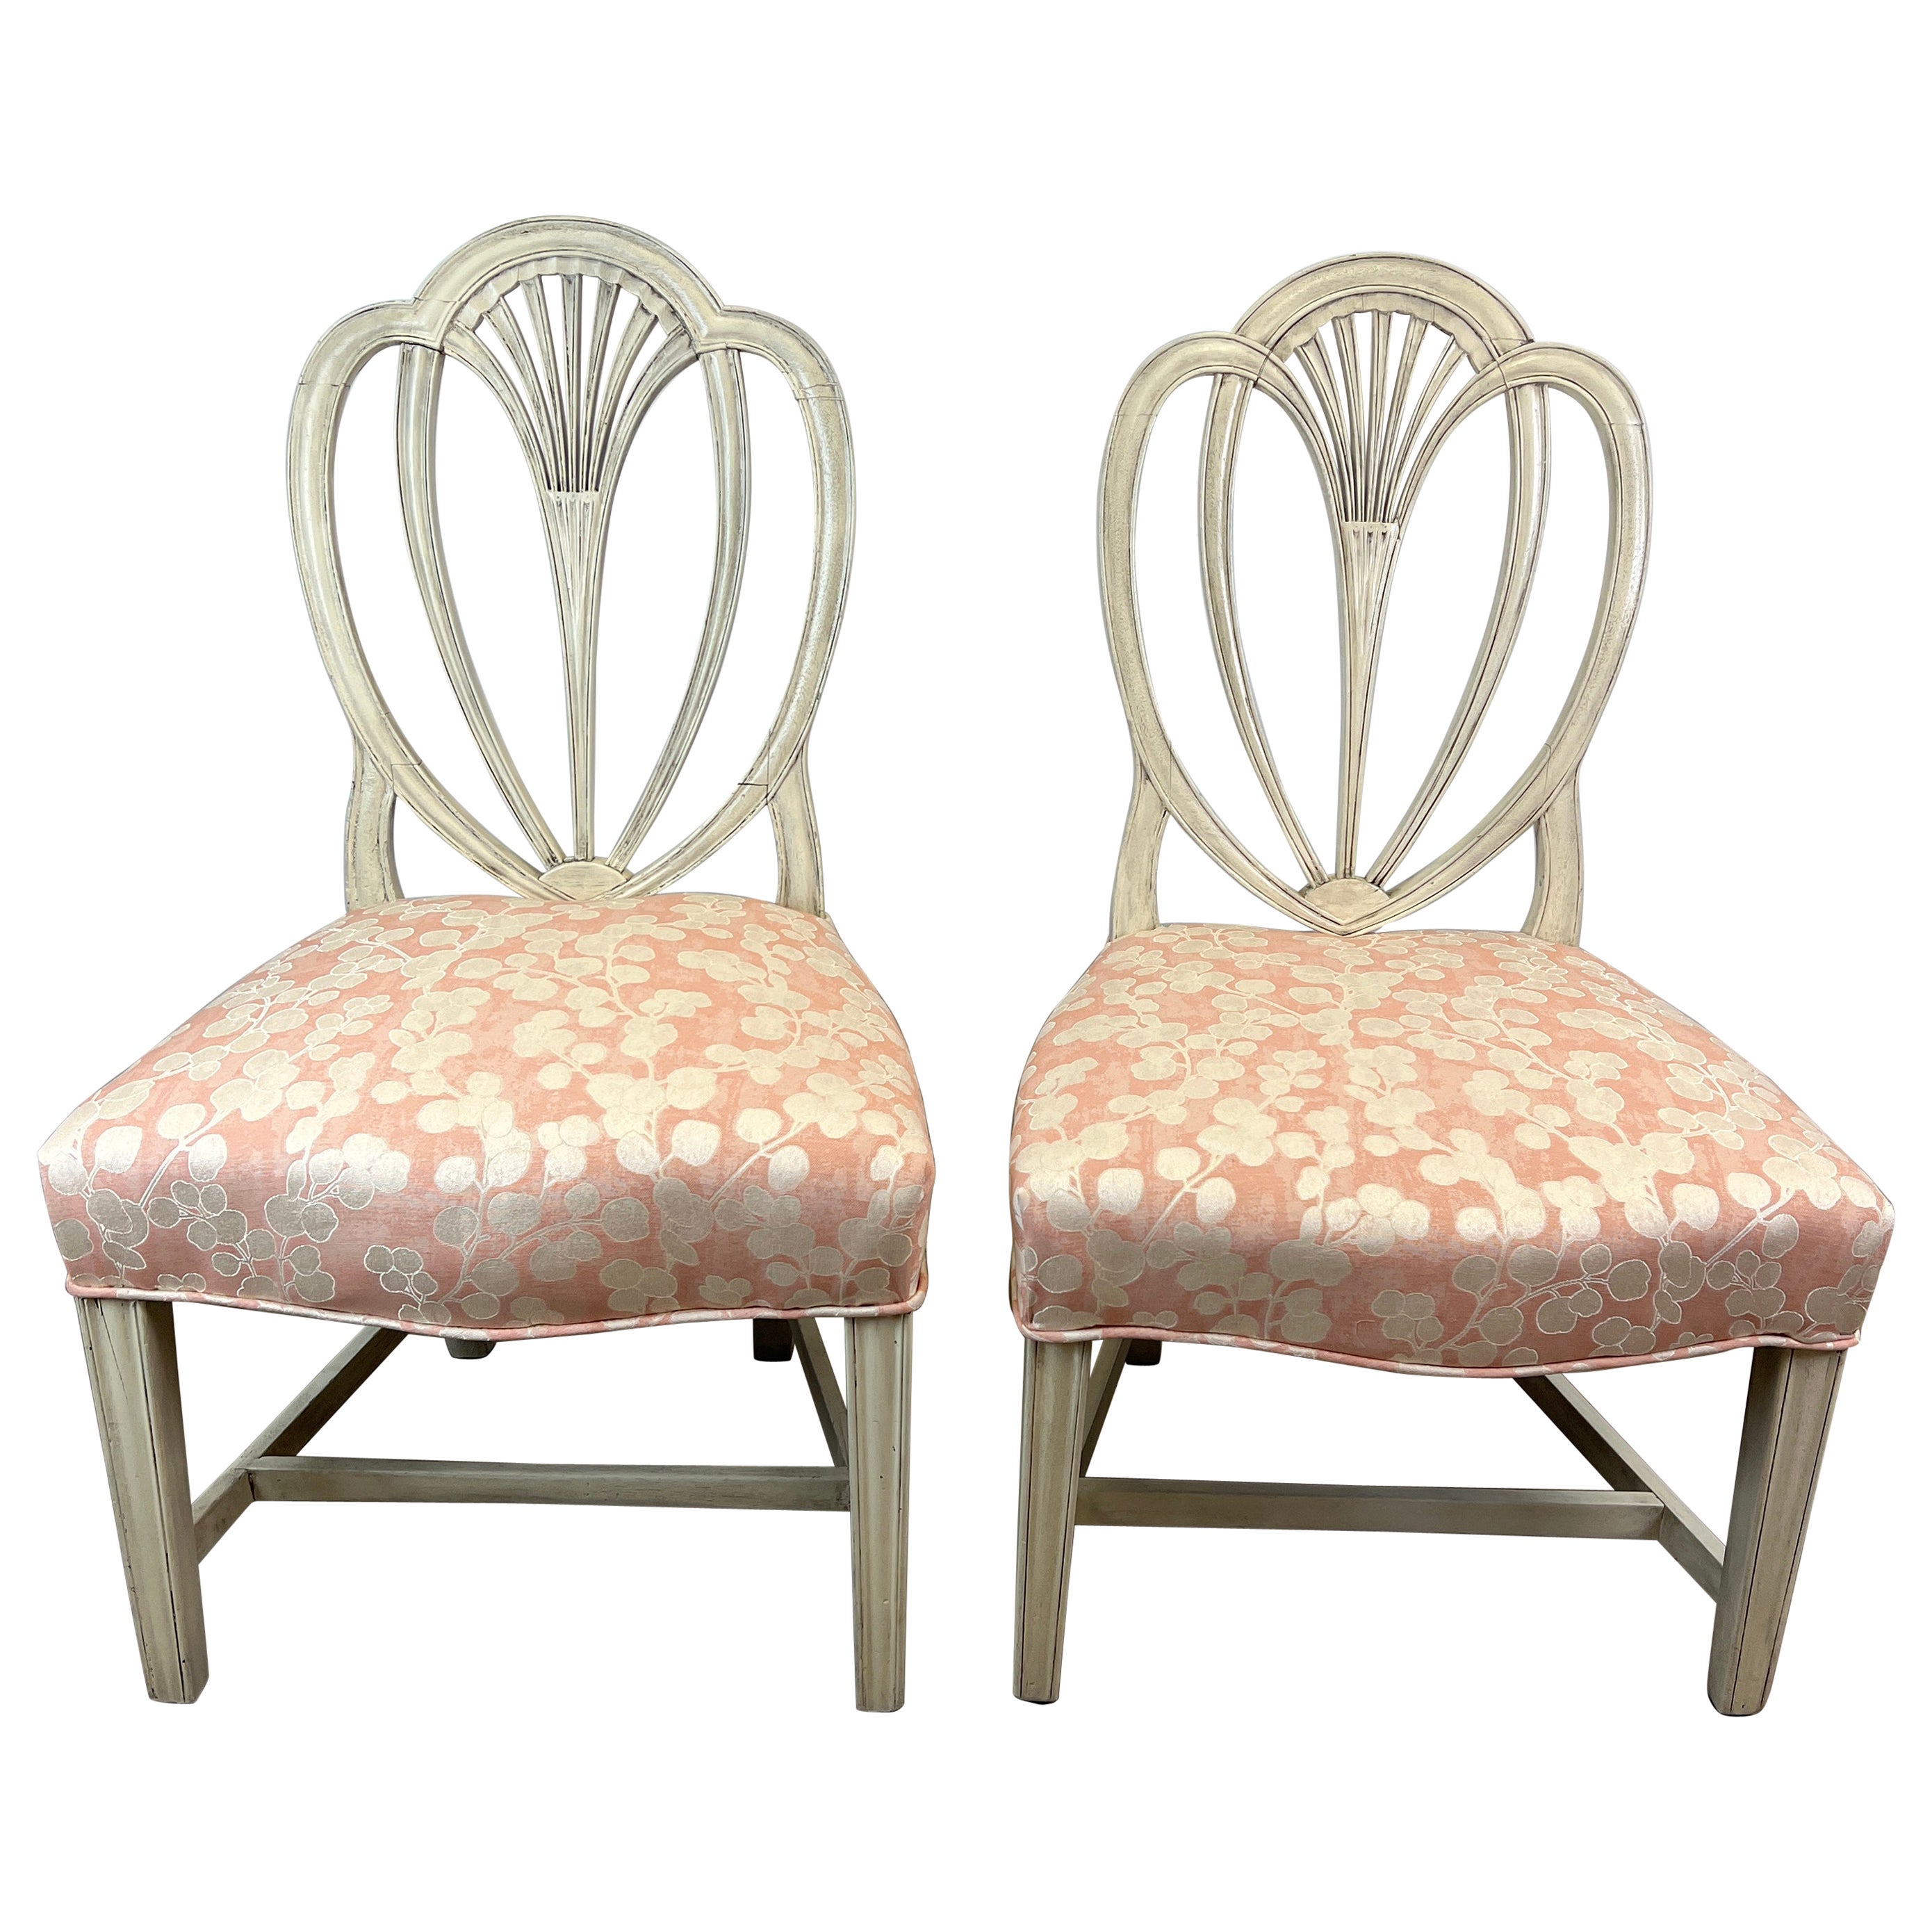 Pair of 18th Century American Mid-Atlantic Hepplewhite Arched Back Side Chairs